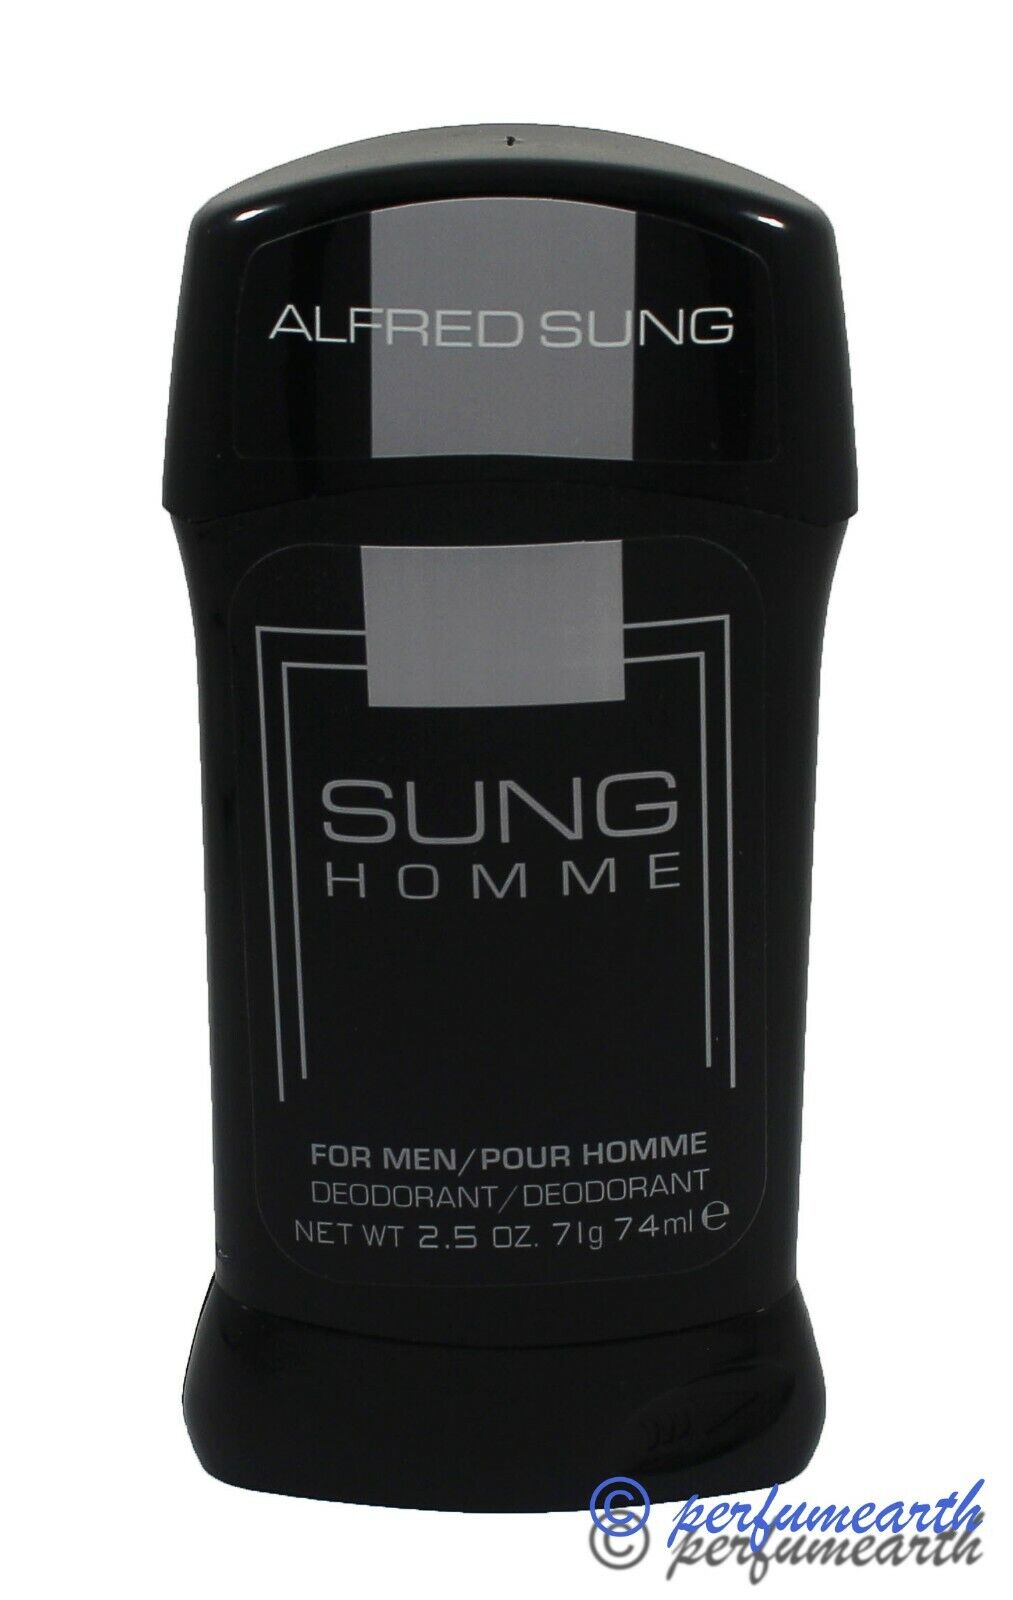 SUNG BY ALFRED SUNG DEODORANT STICK 2.5 OZ/74 ML FOR MEN NEW NO BOX